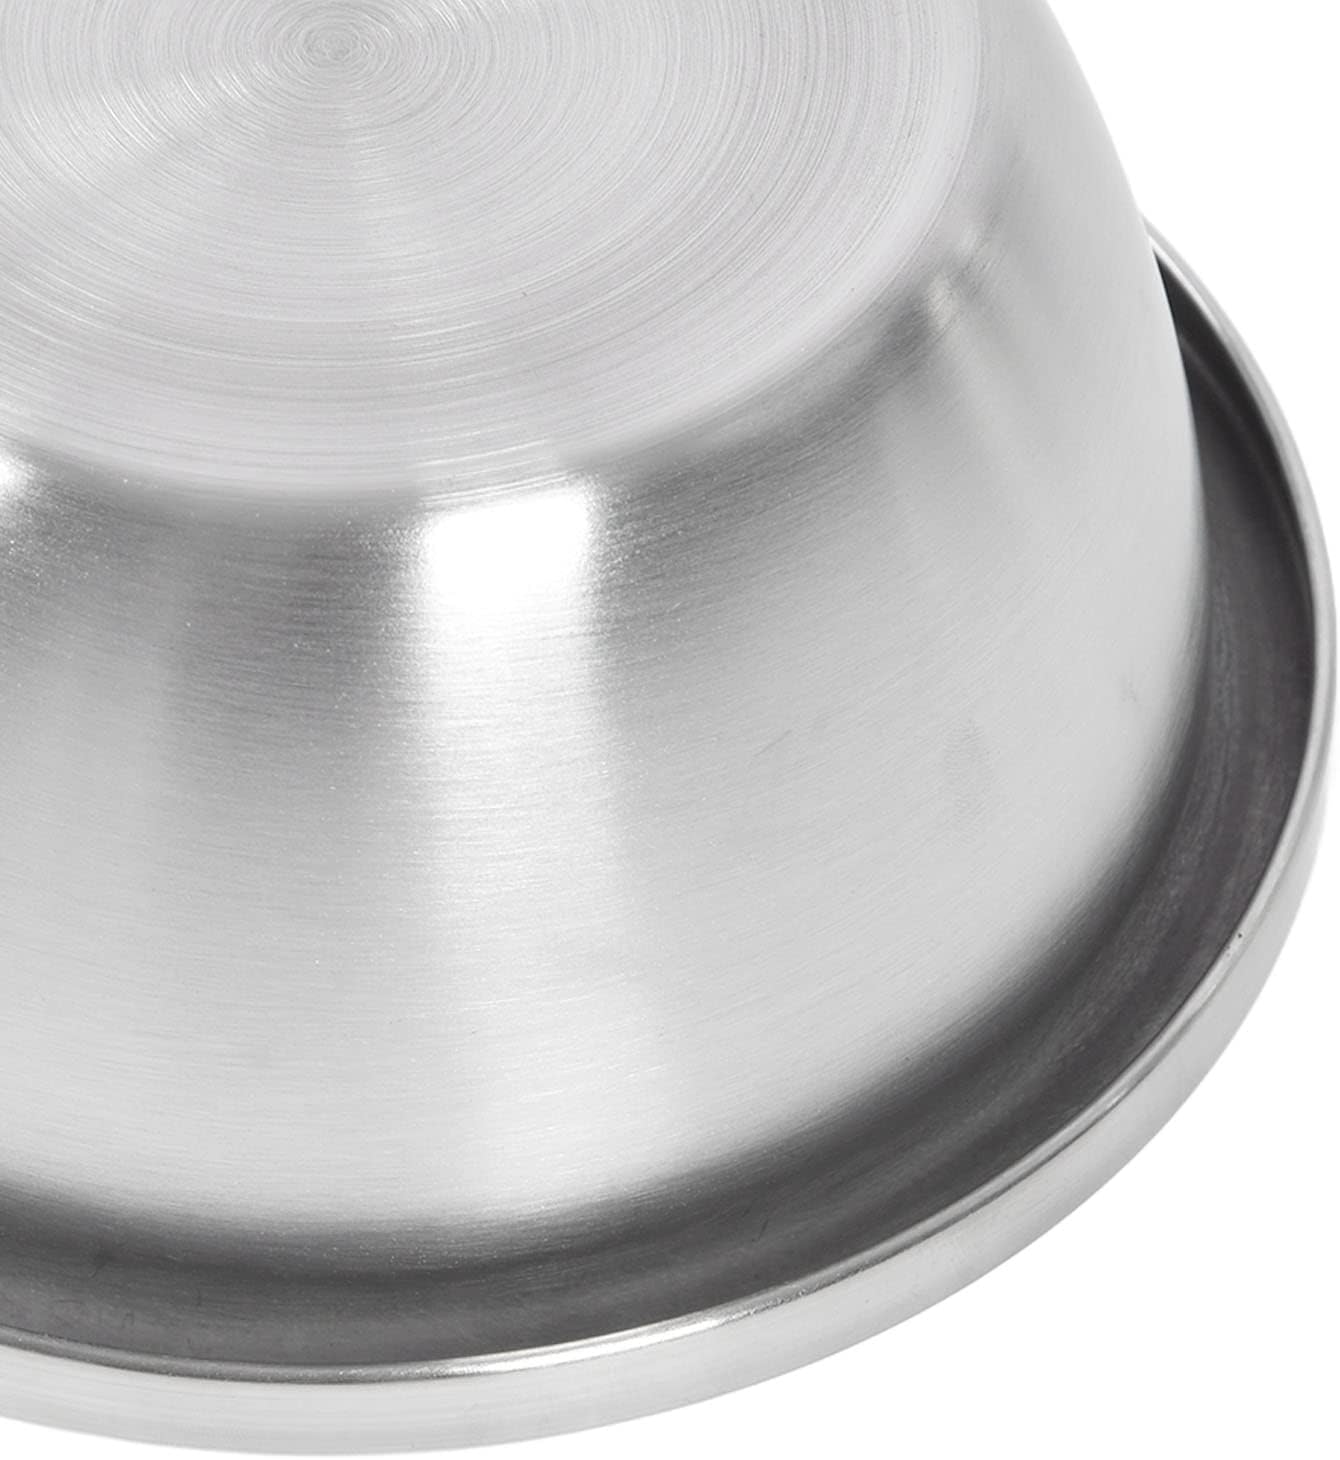 Stainless Steel Mixing Bowl Set (Set of 5) - Home Essentials Store